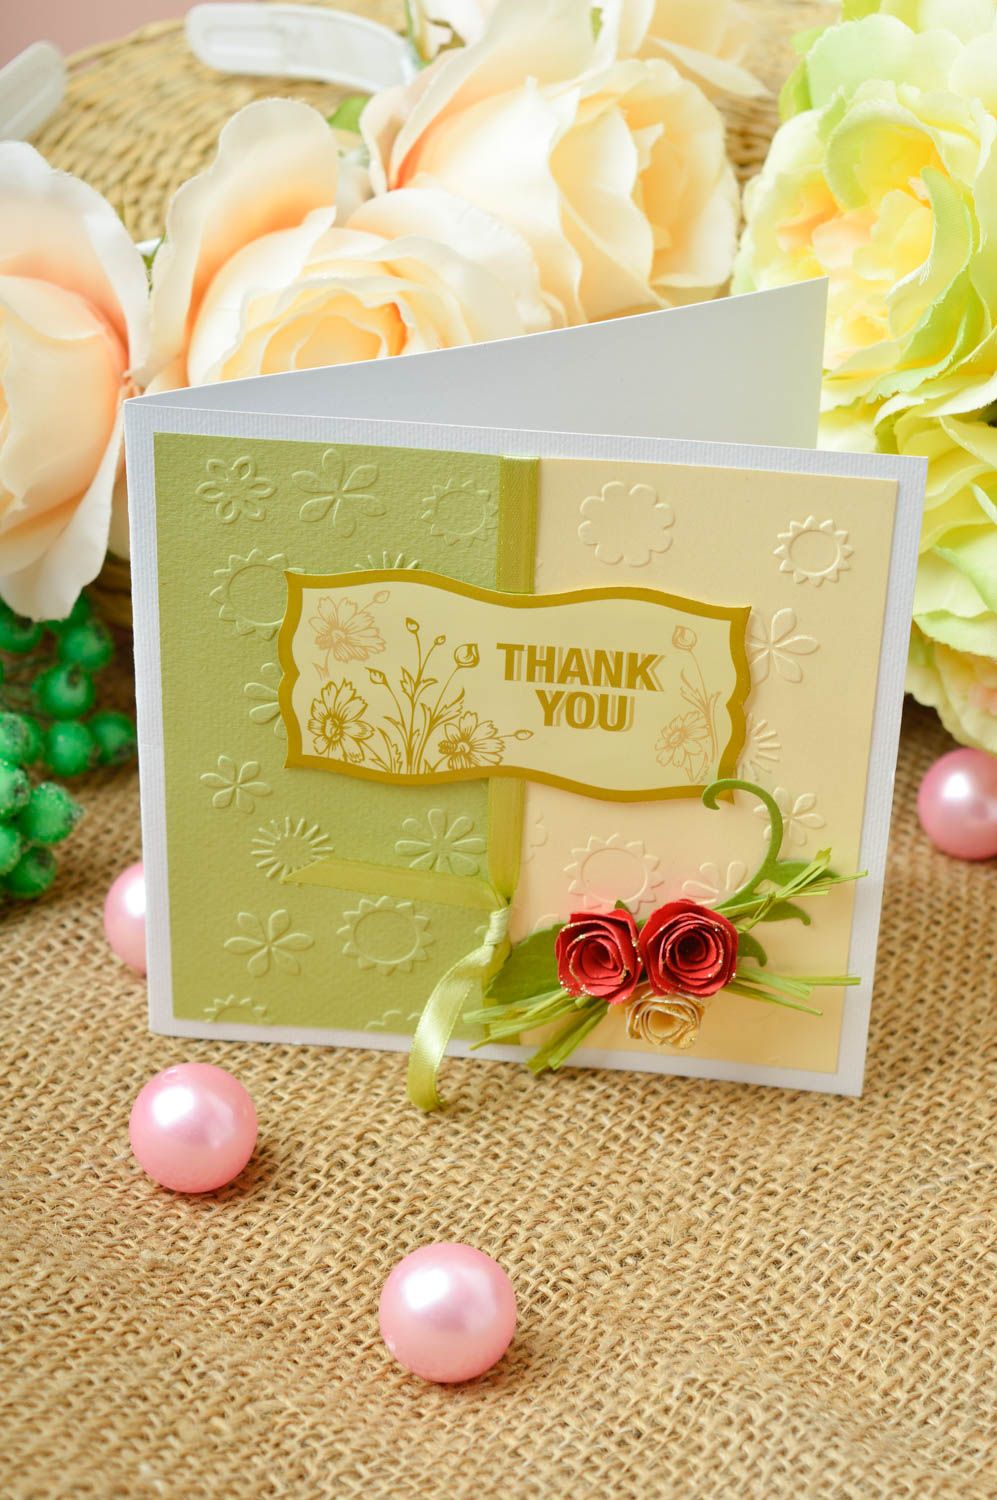 Homemade greeting card thank you card homemade cards souvenir ideas cool gifts photo 1